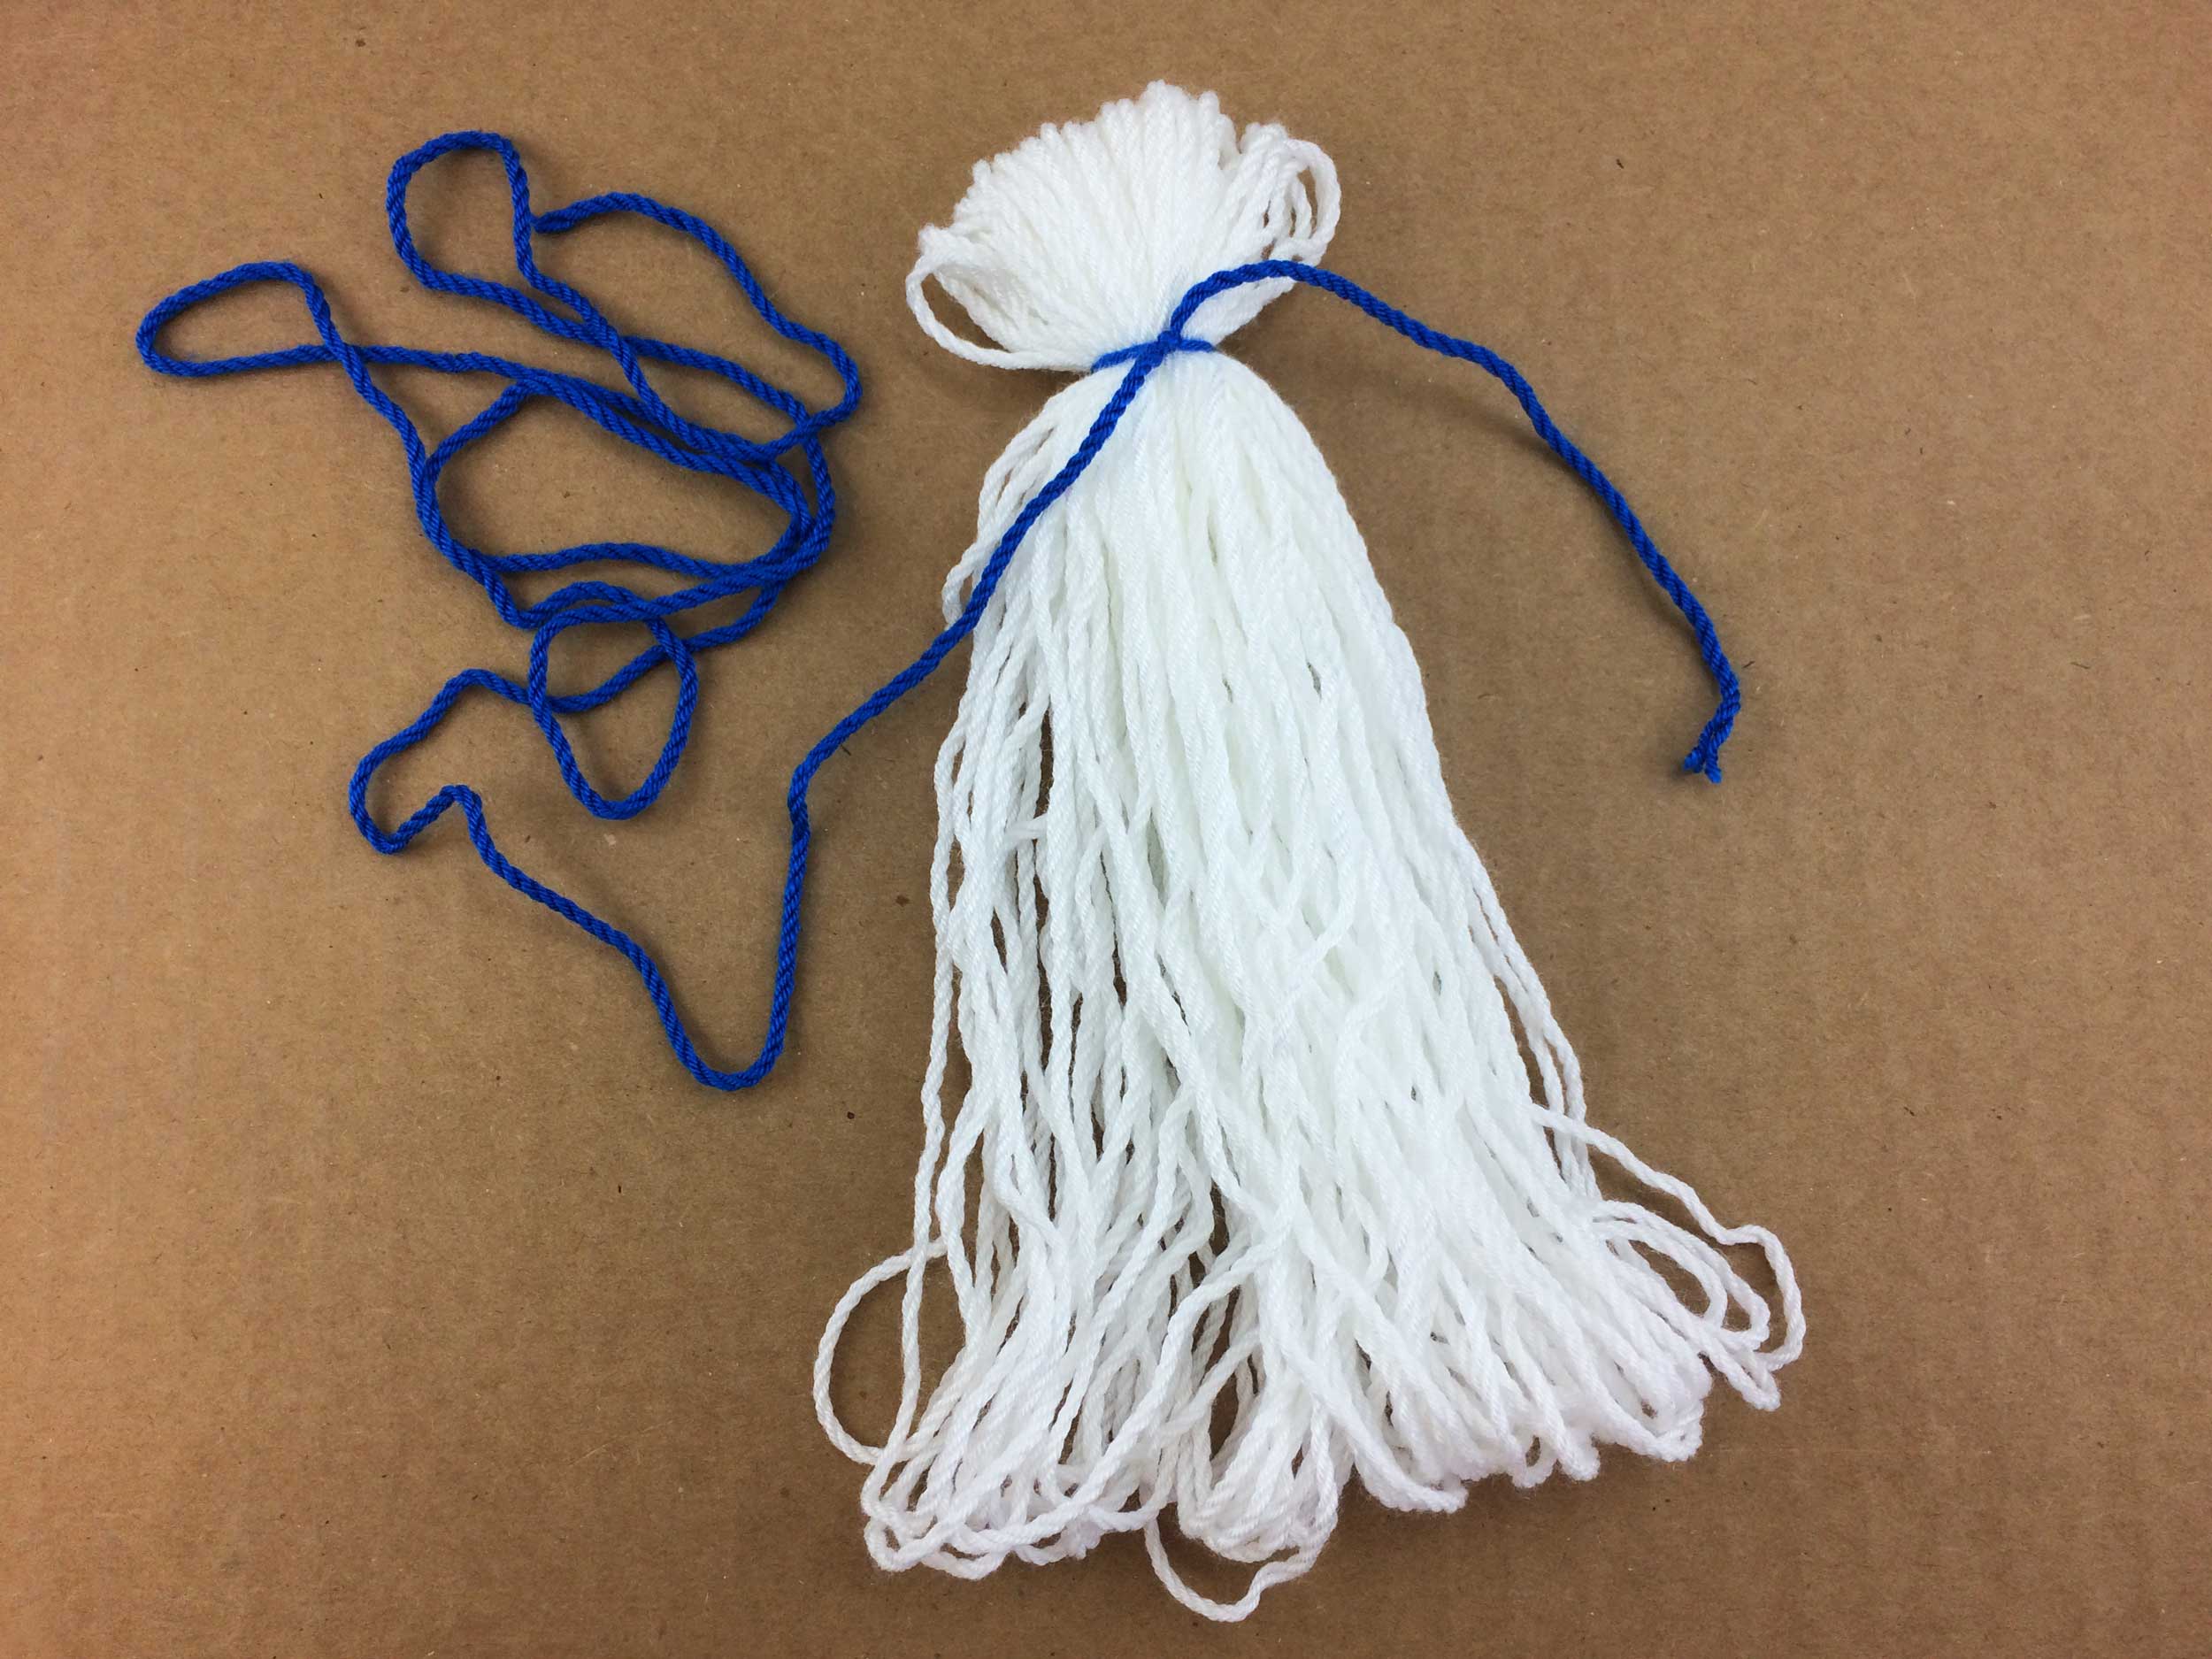 Remove yarn from DVD case and tie a knot in contrasting color | OrnamentShop.com